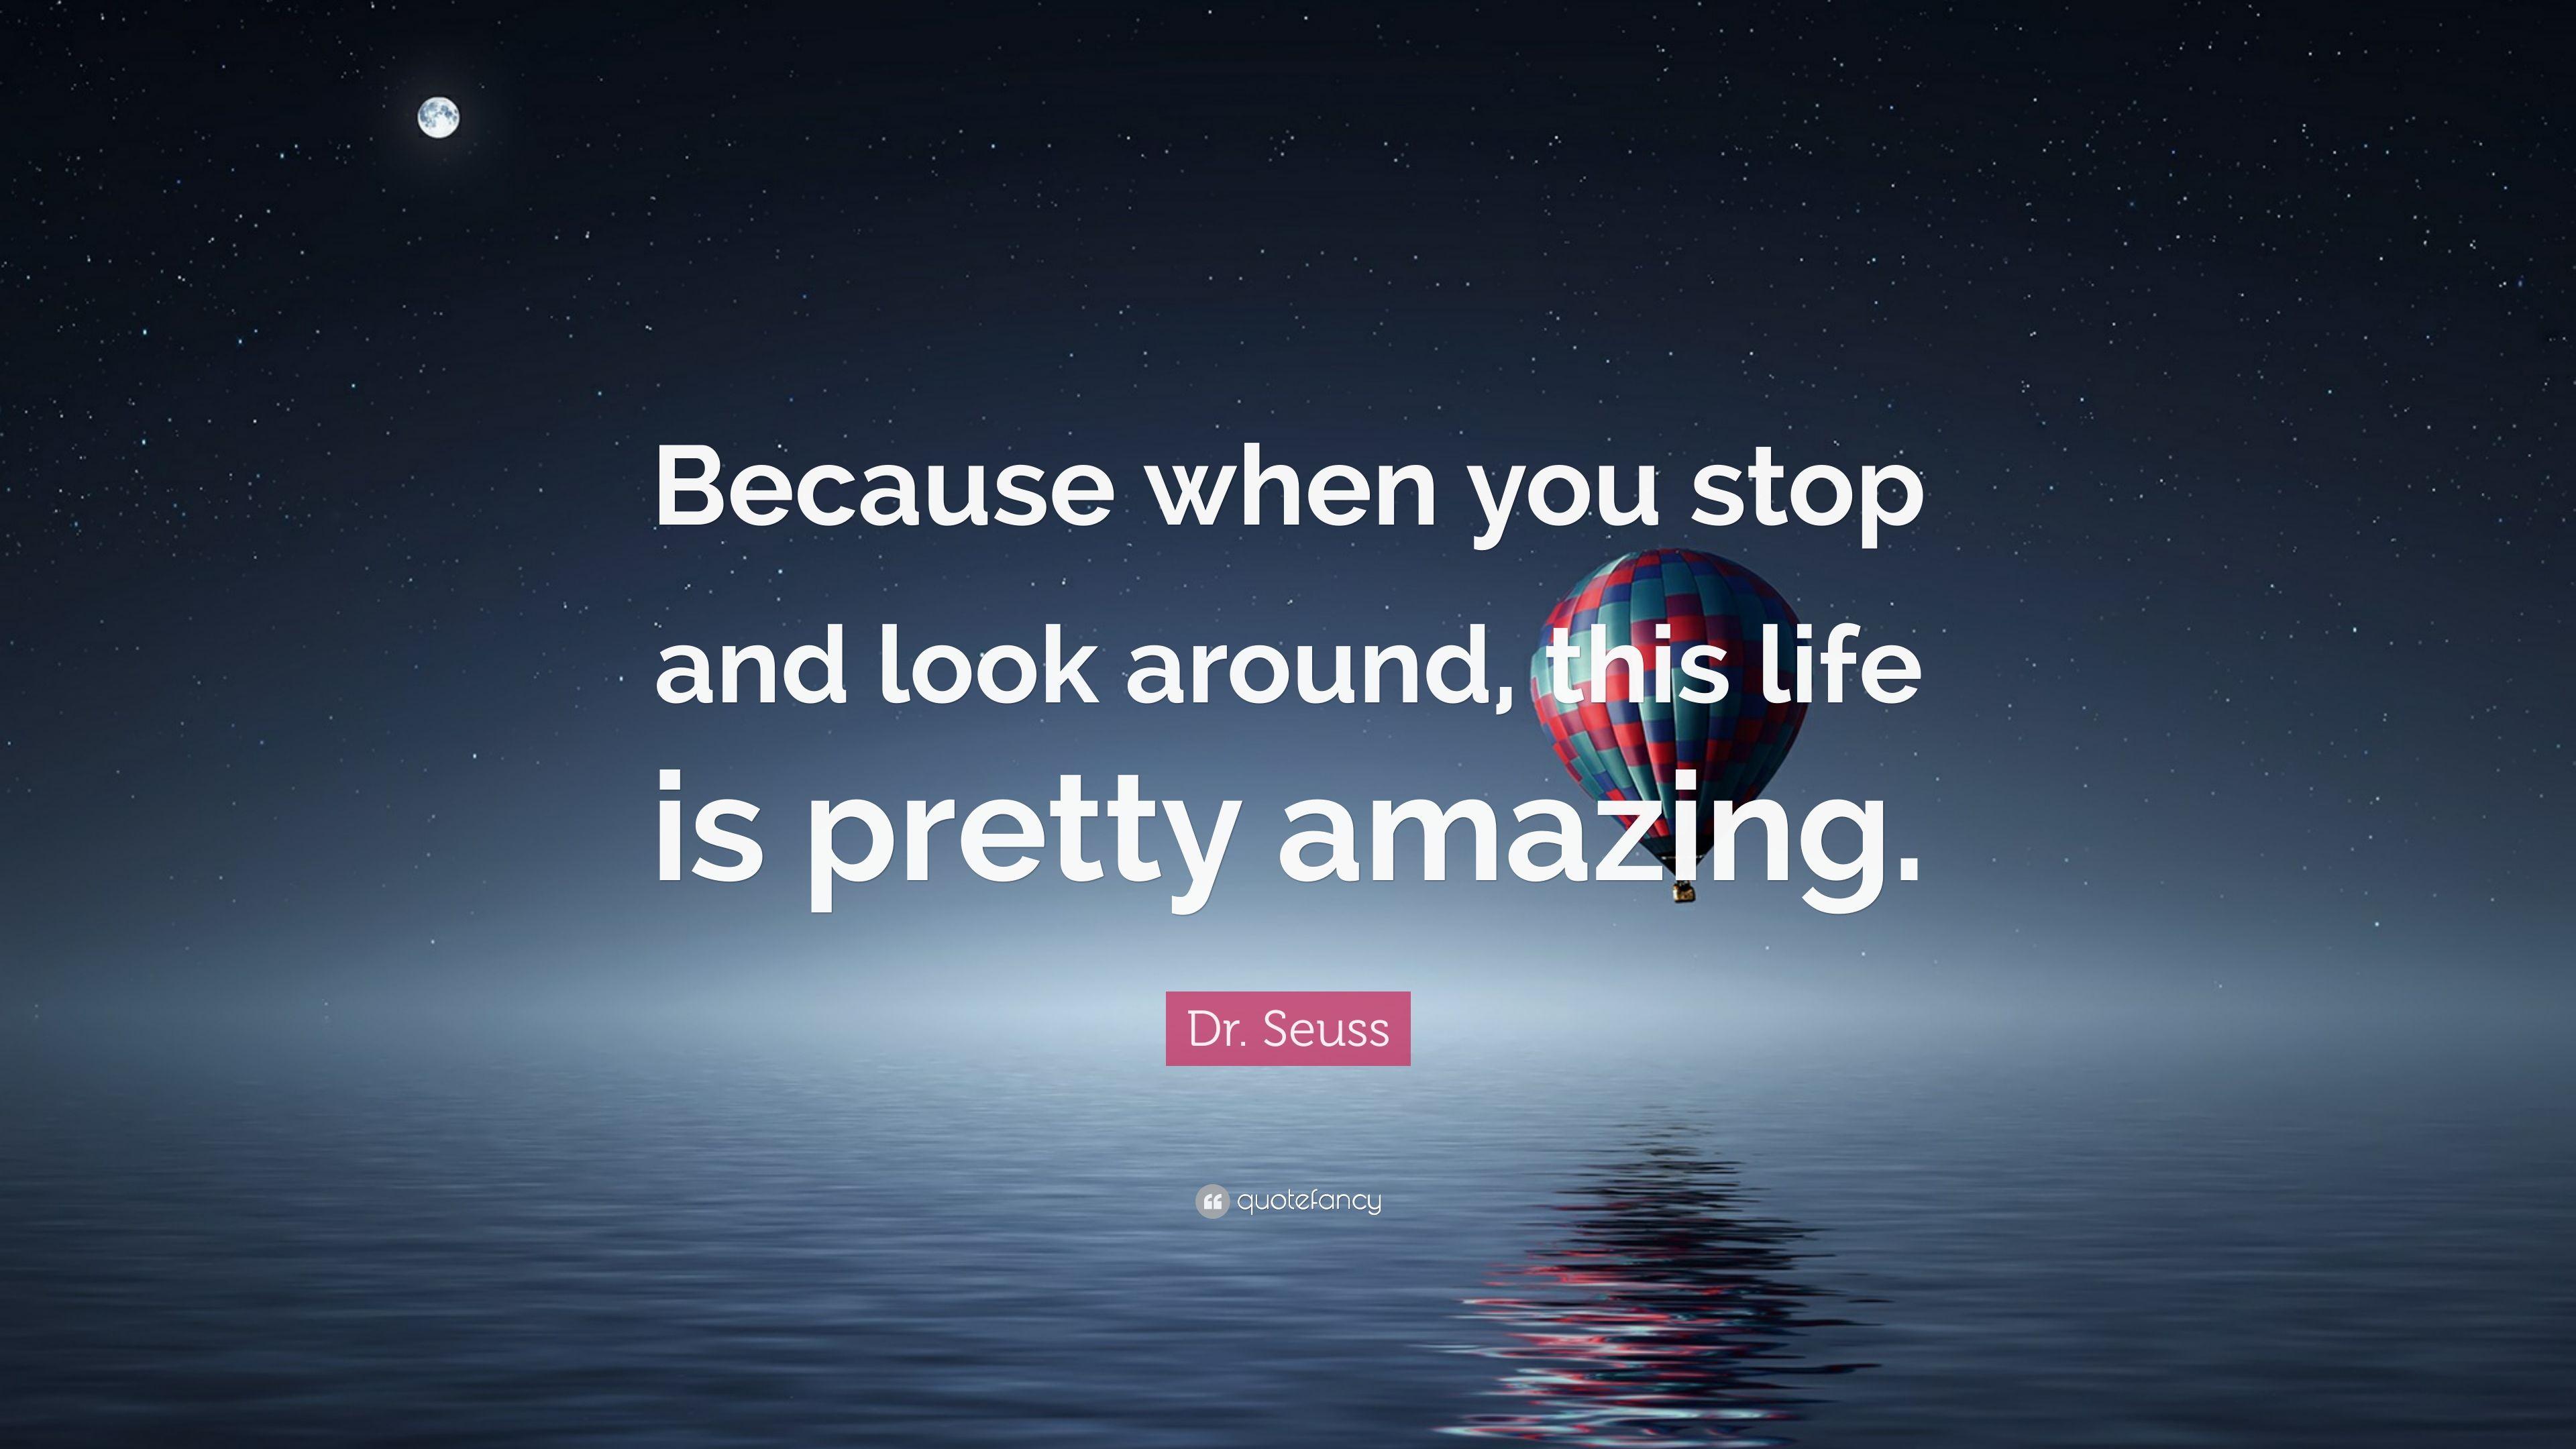 Dr. Seuss Quote: “Because when you stop and look around, this life